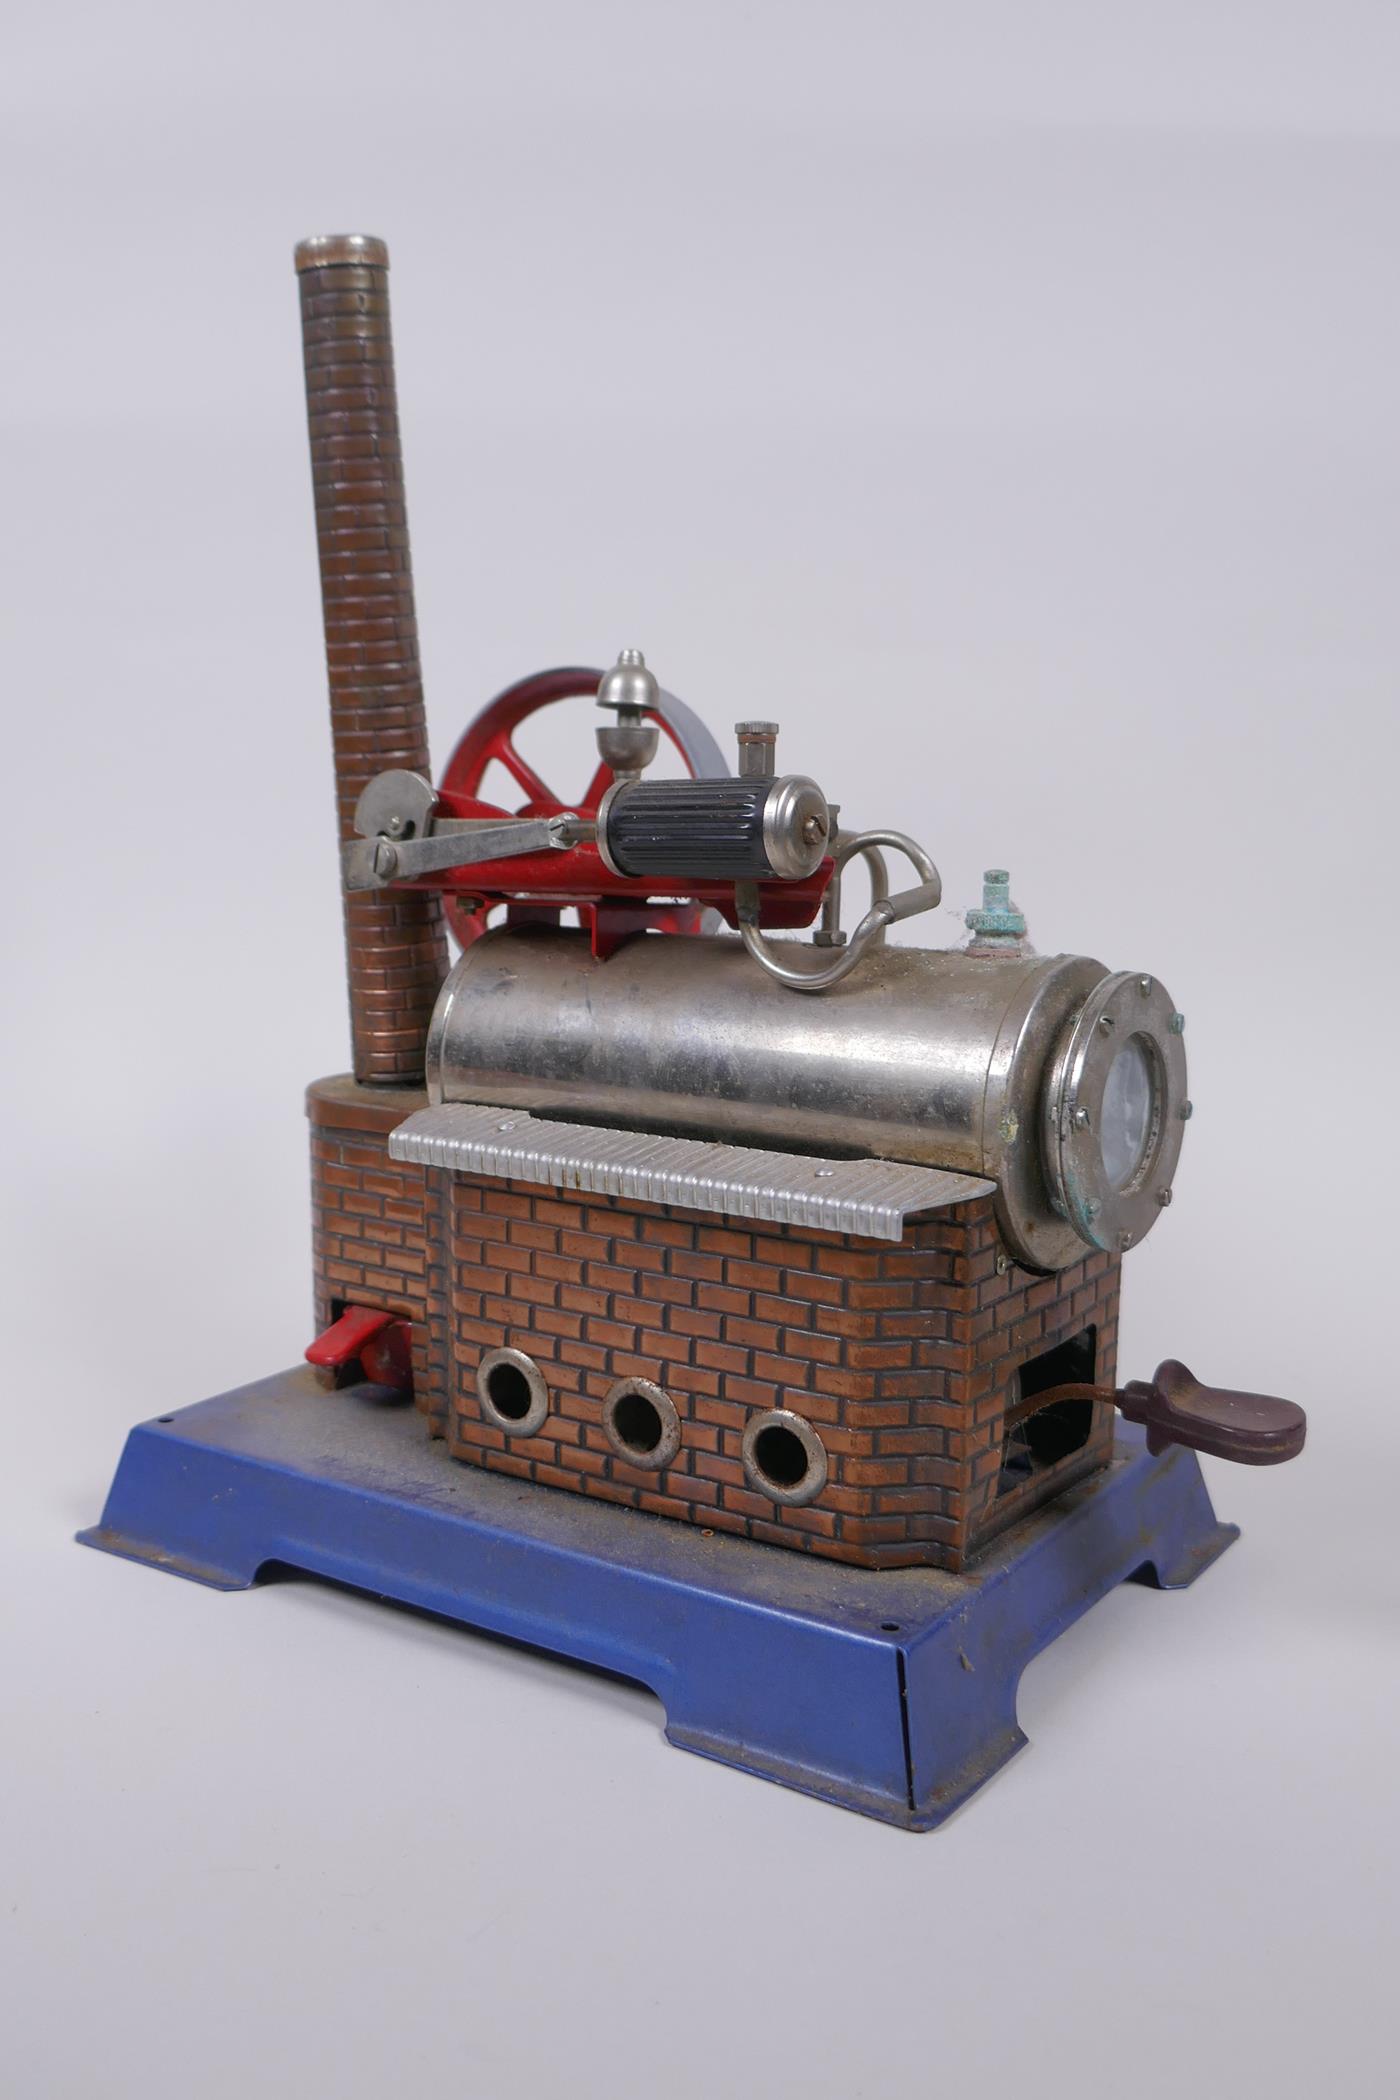 A Wilesco D14 Static Steam Engine, with original operating instructions, 20 x 14cm